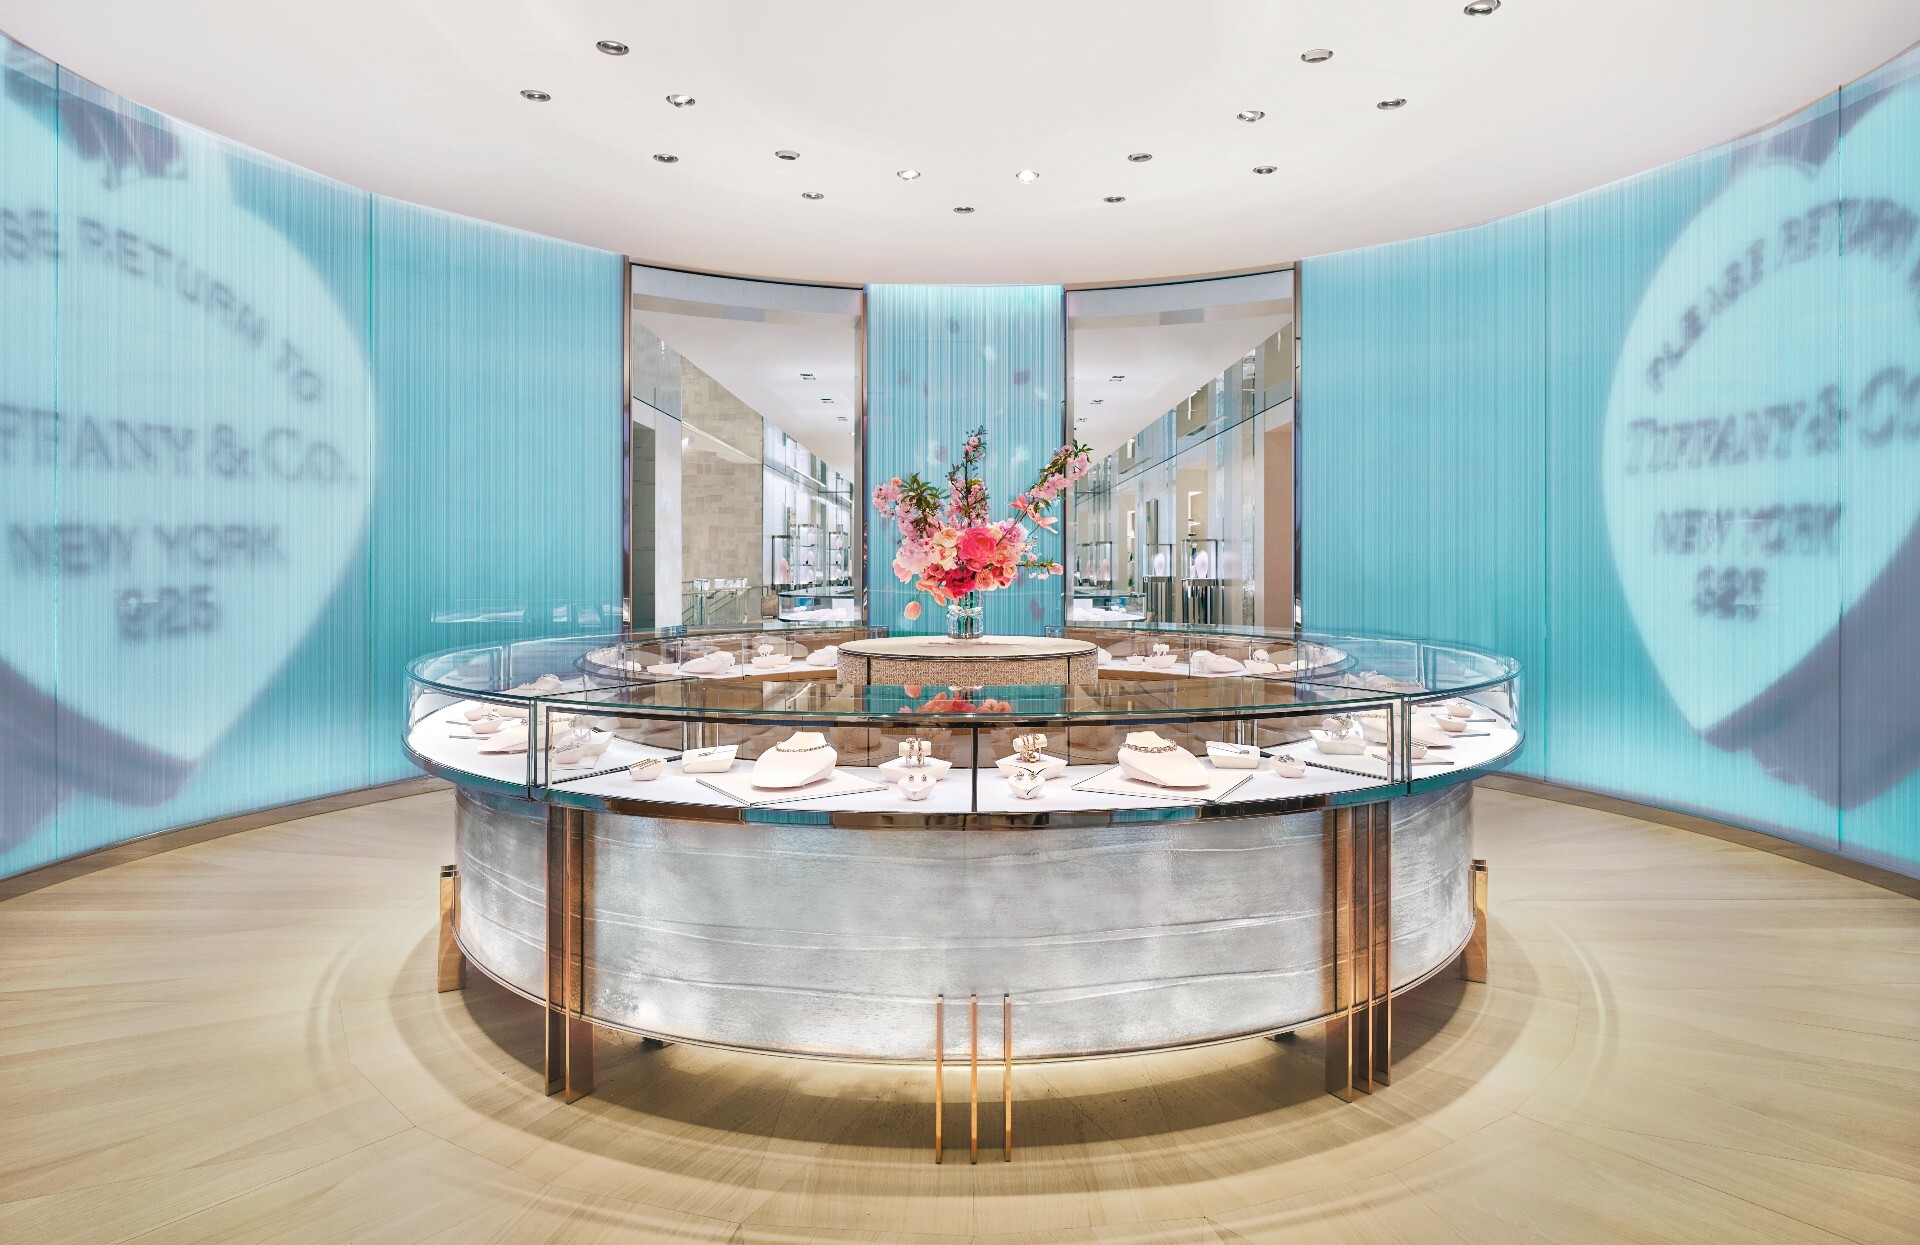 Tiffany to reopen NYC flagship under French management - Digital Journal